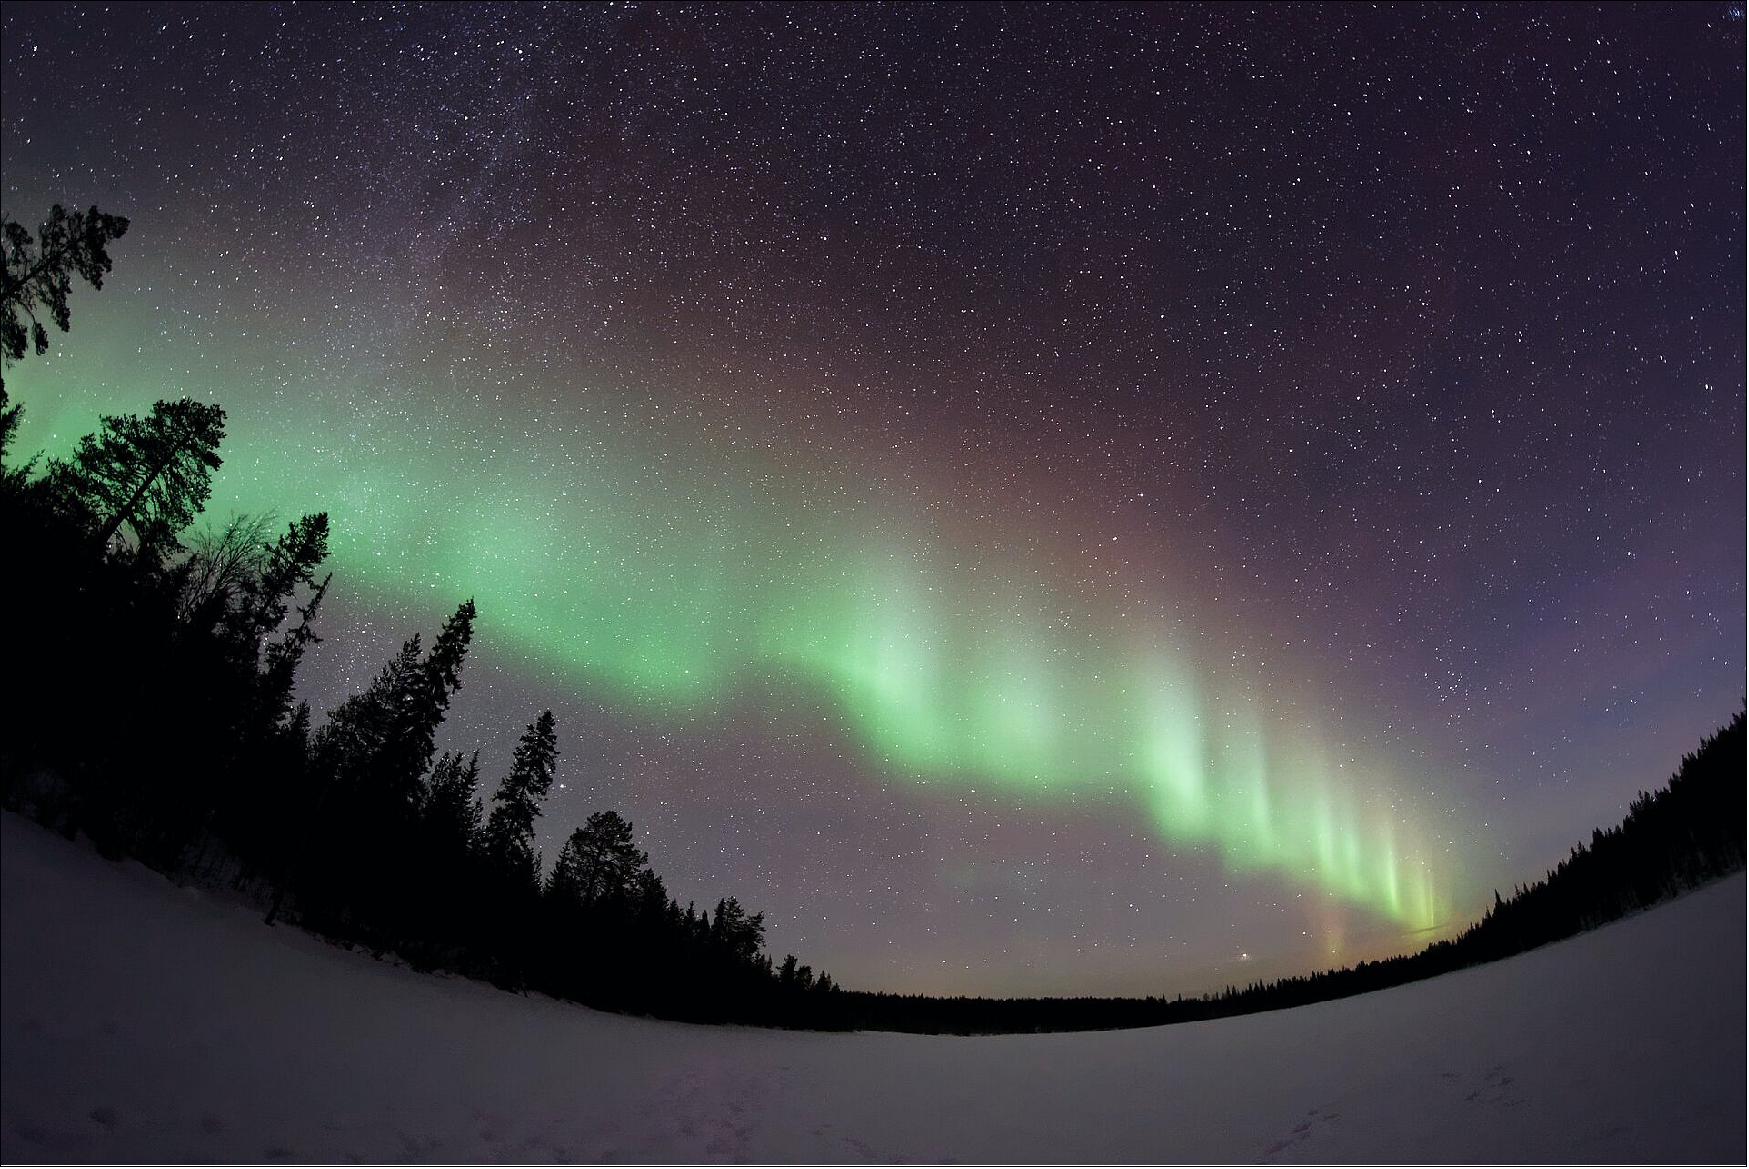 Figure 9: Photo of auroral beads captured from Earth (image credit: Vincent Guth)